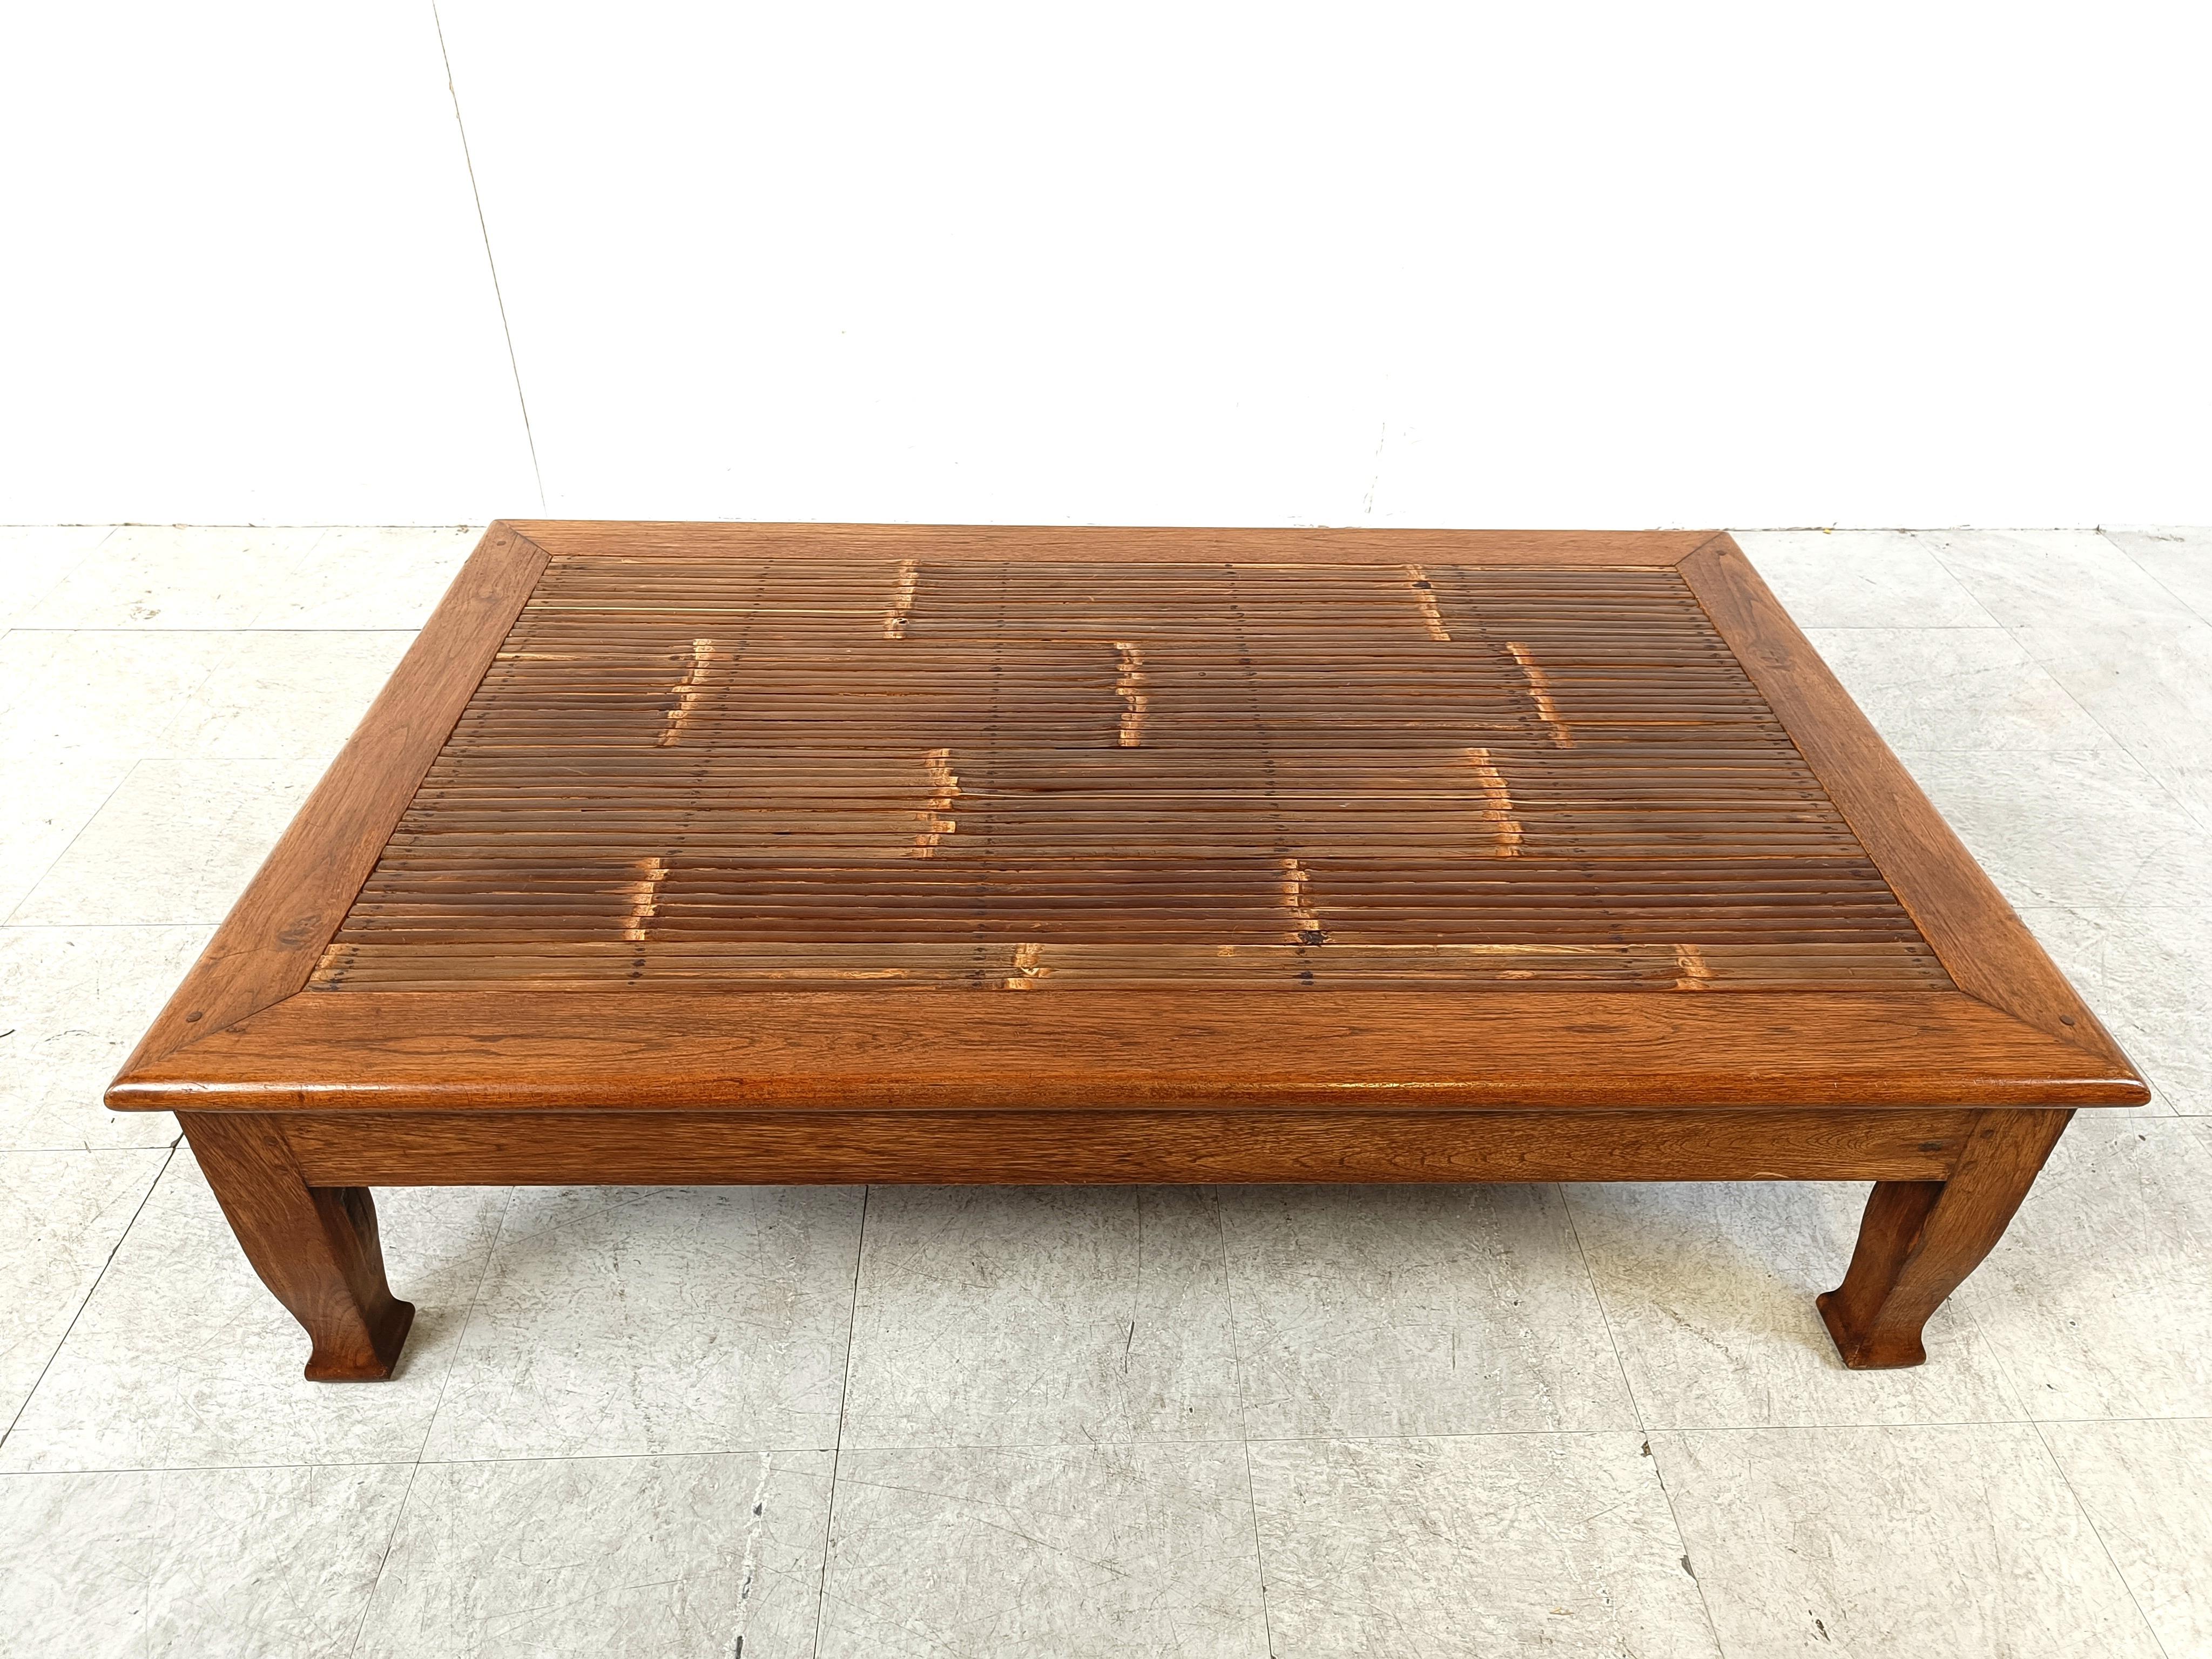 Beautiful bamboo and solid wood coffee table.

The legs are beautifully crafted with japanese influences.

1980s- Belgium

Very good condition

Dimensions:
Height: 36cm
Width: 130cm
Depth 80cm

Ref.: 771291